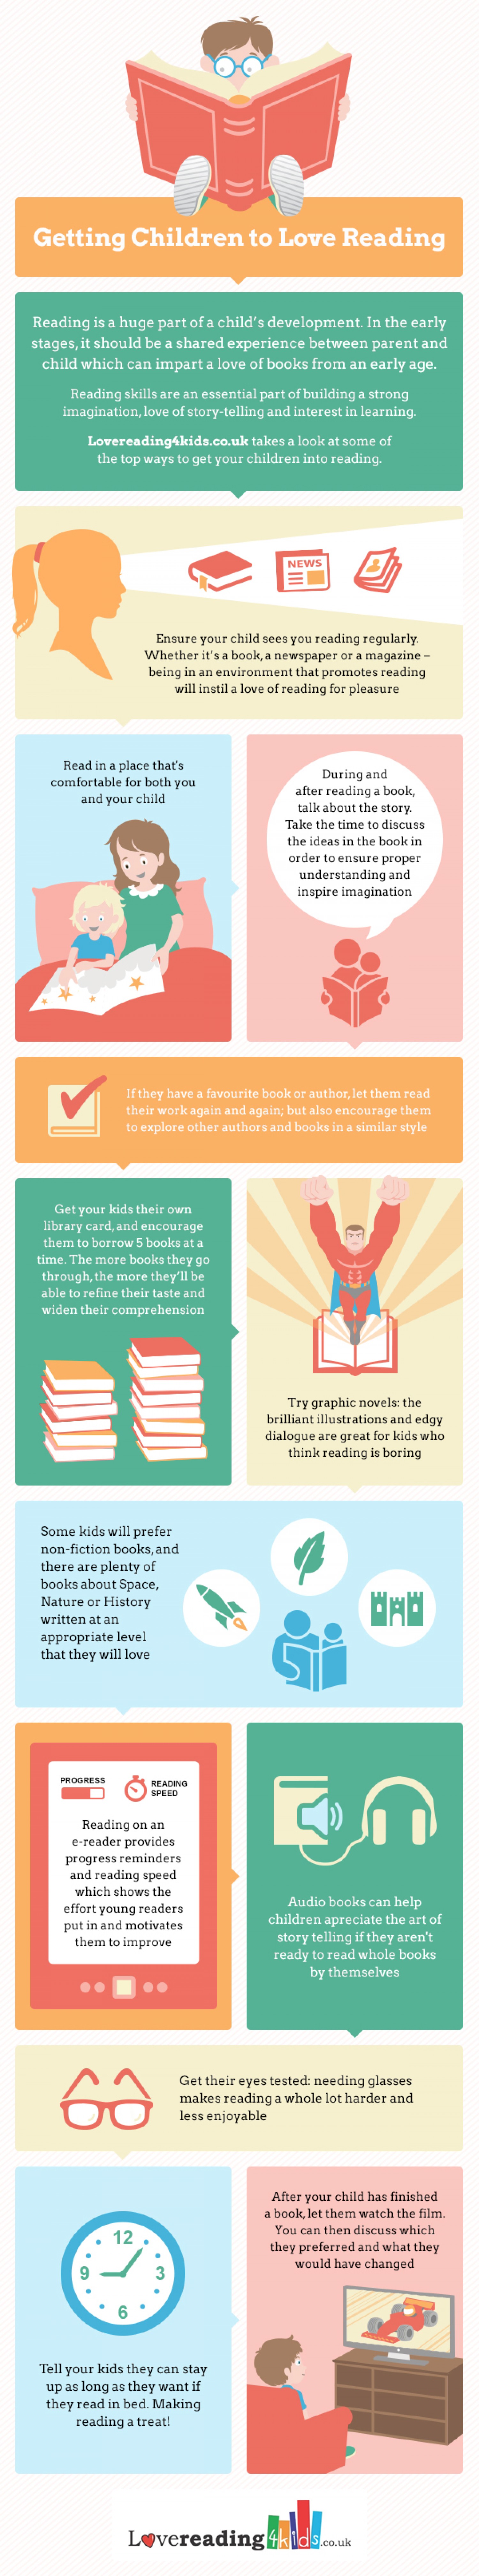 How to Get Your Kids to Love Reading - Infographic